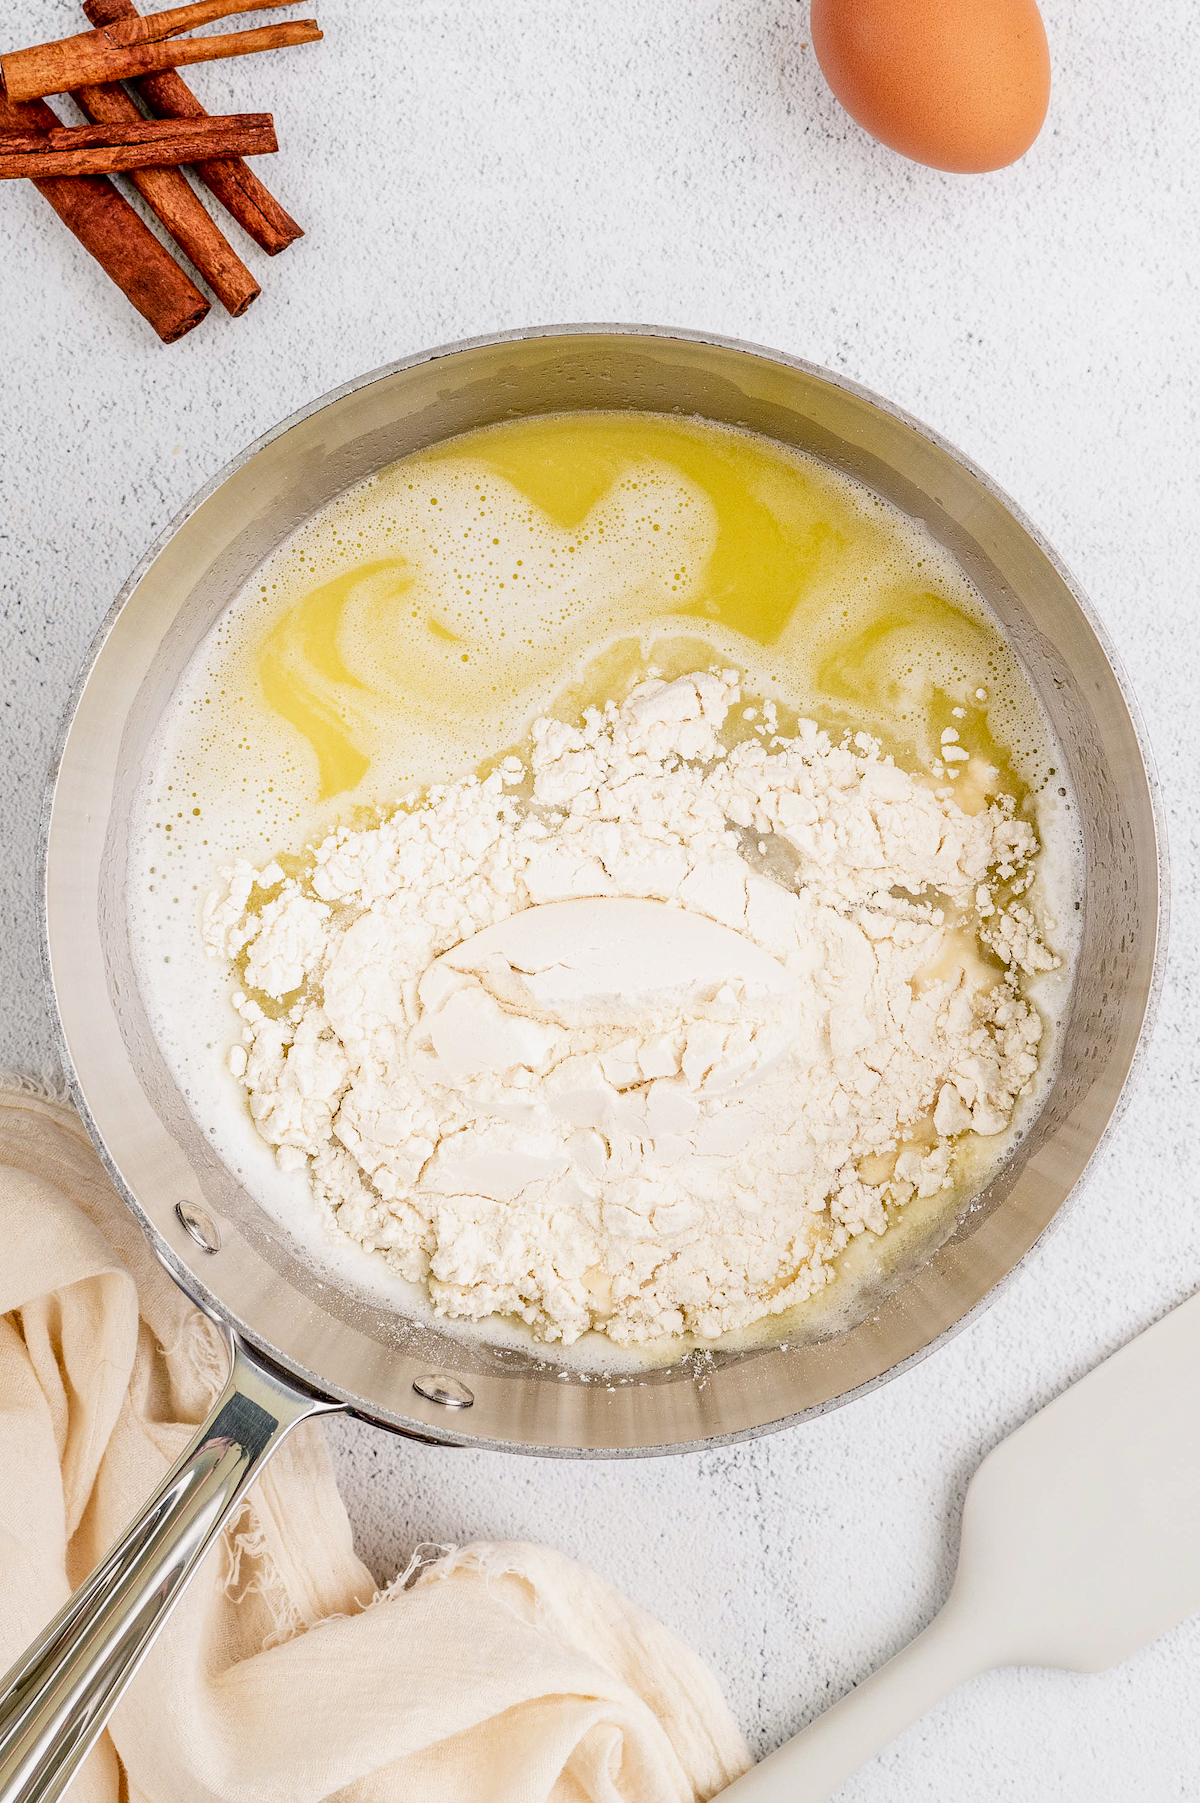 Adding the flour to the melted butter mixture in the pot.